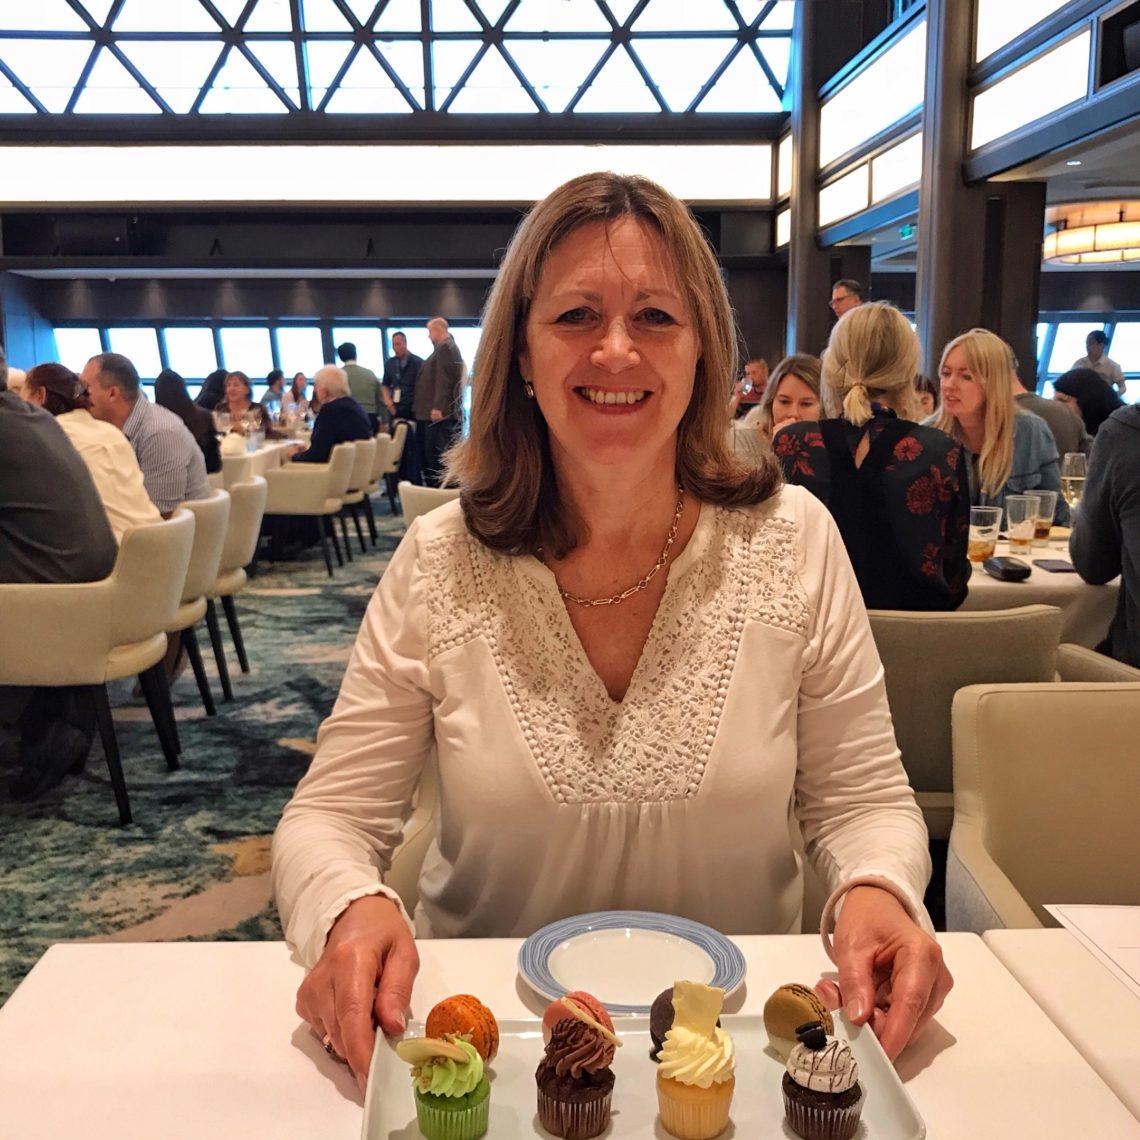 🚢 Foodies check out the specialty restaurants and complimentary dining options available on the new Norwegian Encore @CruiseNorwegian
👉 heatheronhertravels.com/norwegian-enco…
🍴The Observation Lounge is just one of many public spaces and indoor relaxation areas #presstrip #NorwegianEncore